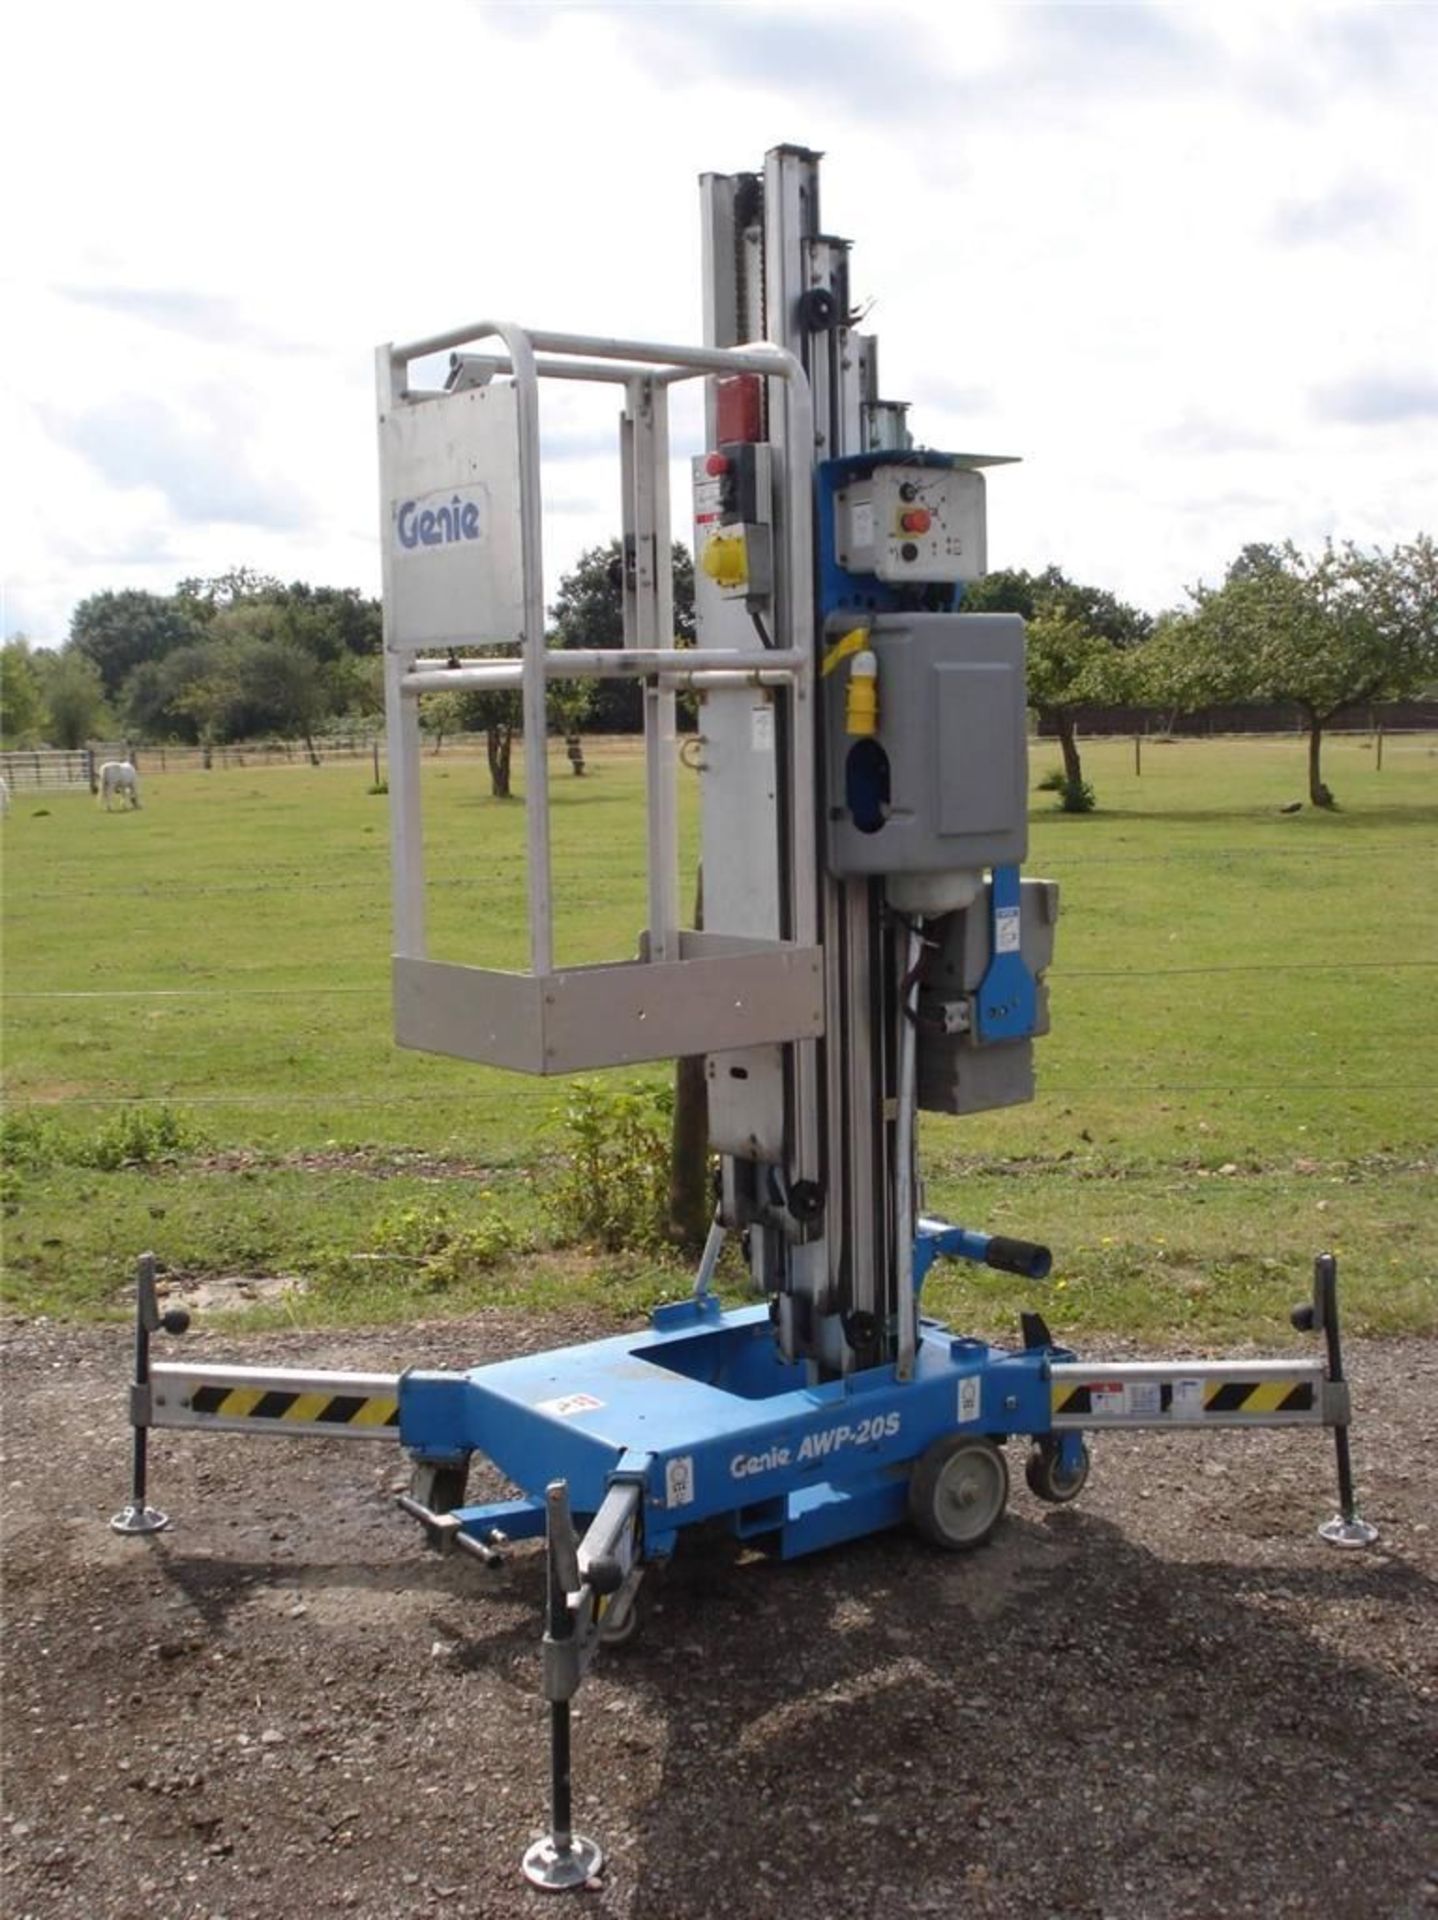 Genie AWP 20S standard base personnel access hoist unit with narrow guage cage.